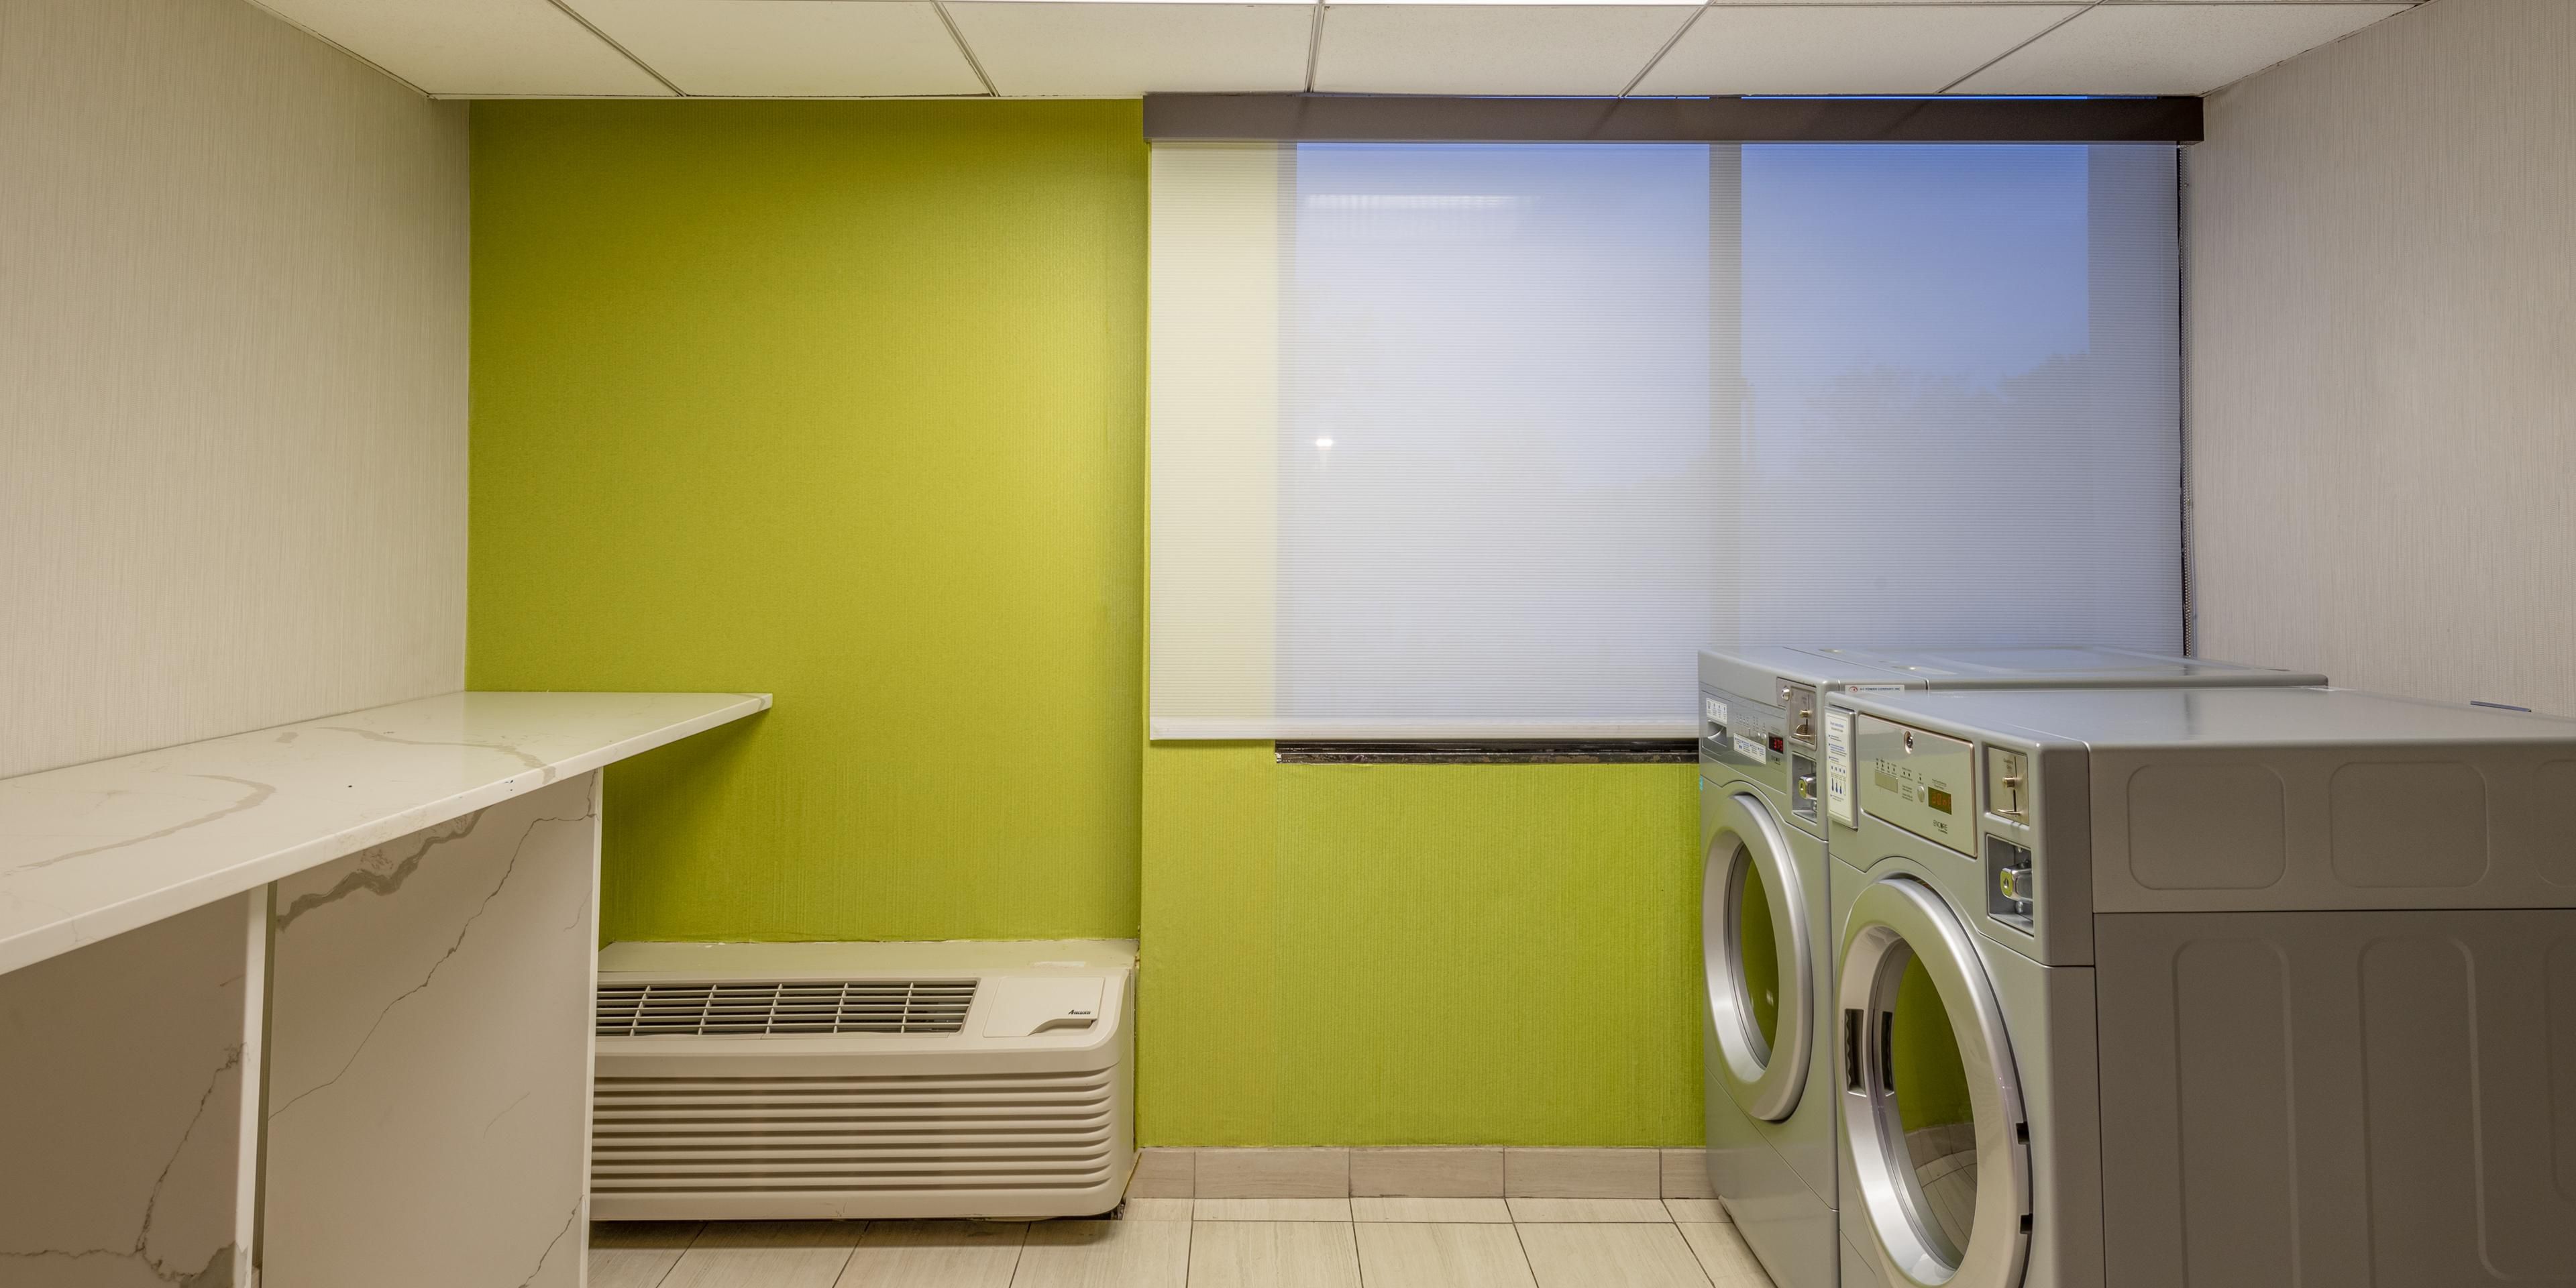 The last thing you want to do is laundry when you are traveling. However, for your convenience, we have a coin-operated washer and dryer!